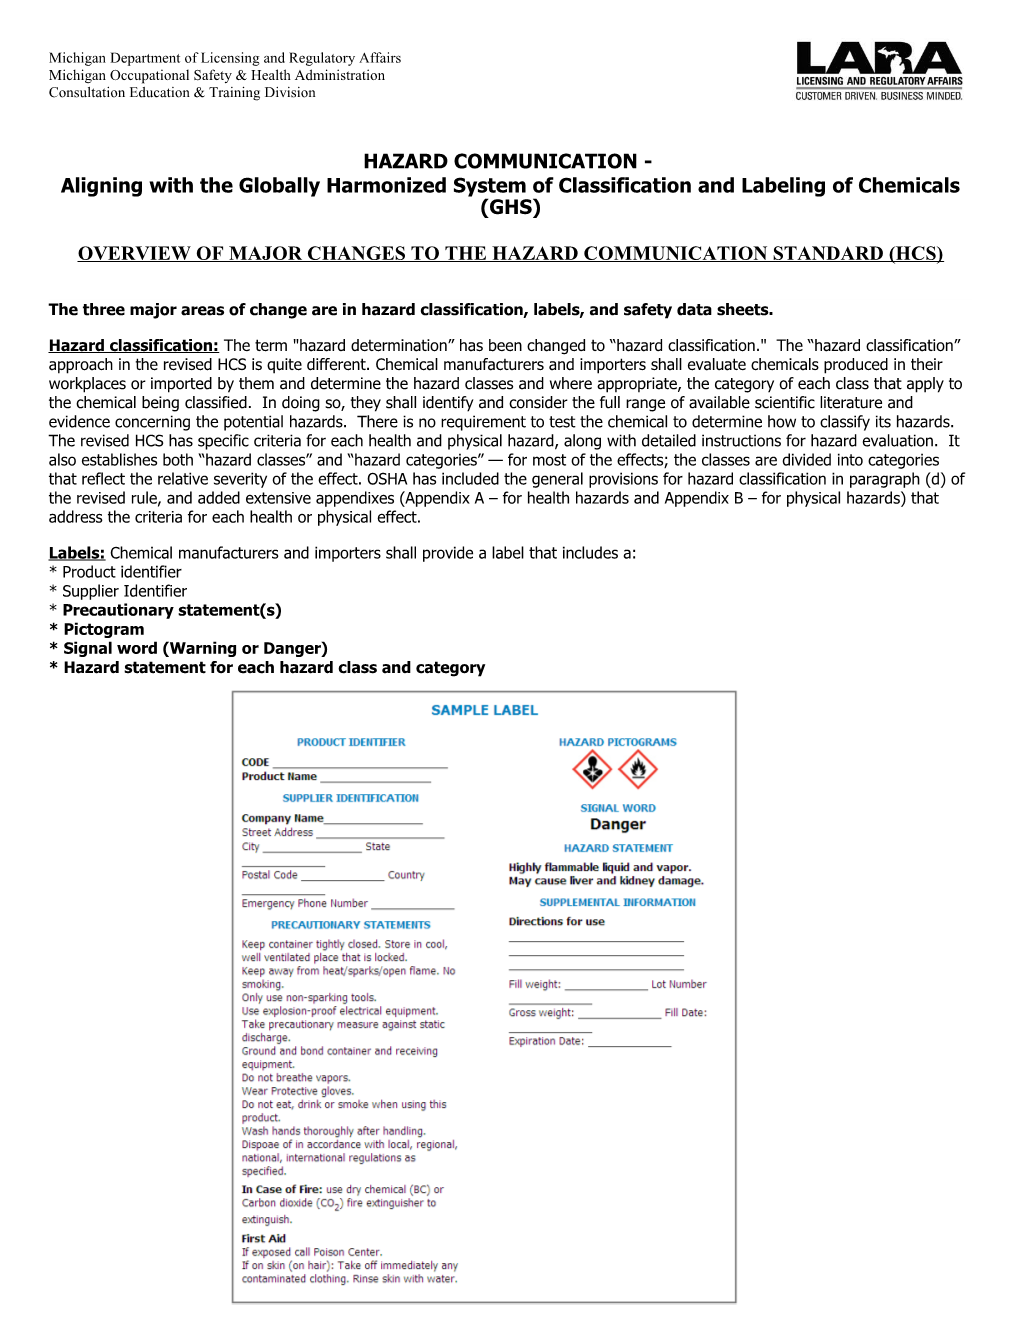 Hazard Communication - Aligning with the Globally Harmonized System of Classifcation And